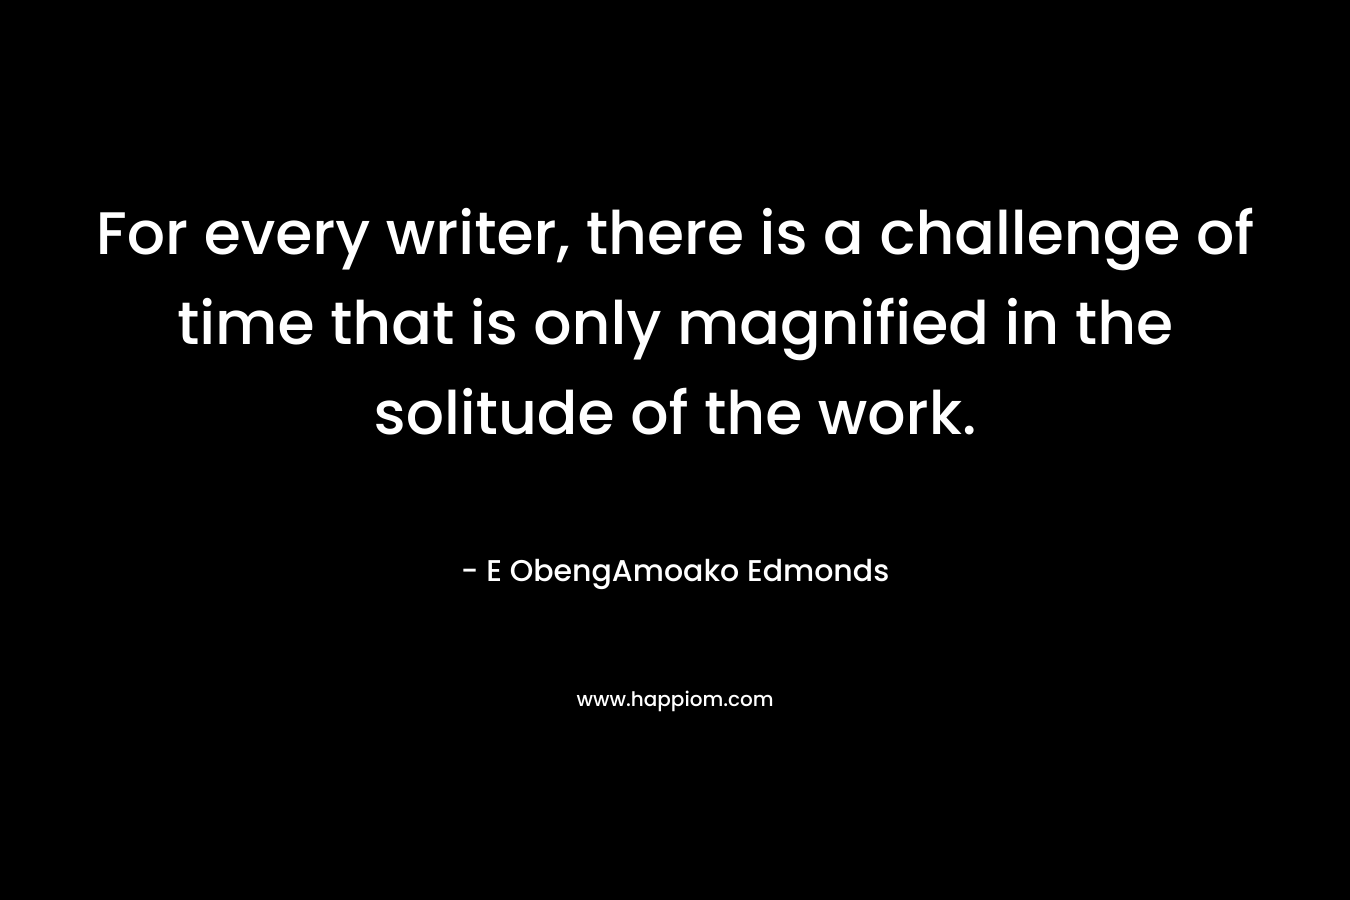 For every writer, there is a challenge of time that is only magnified in the solitude of the work. – E ObengAmoako Edmonds